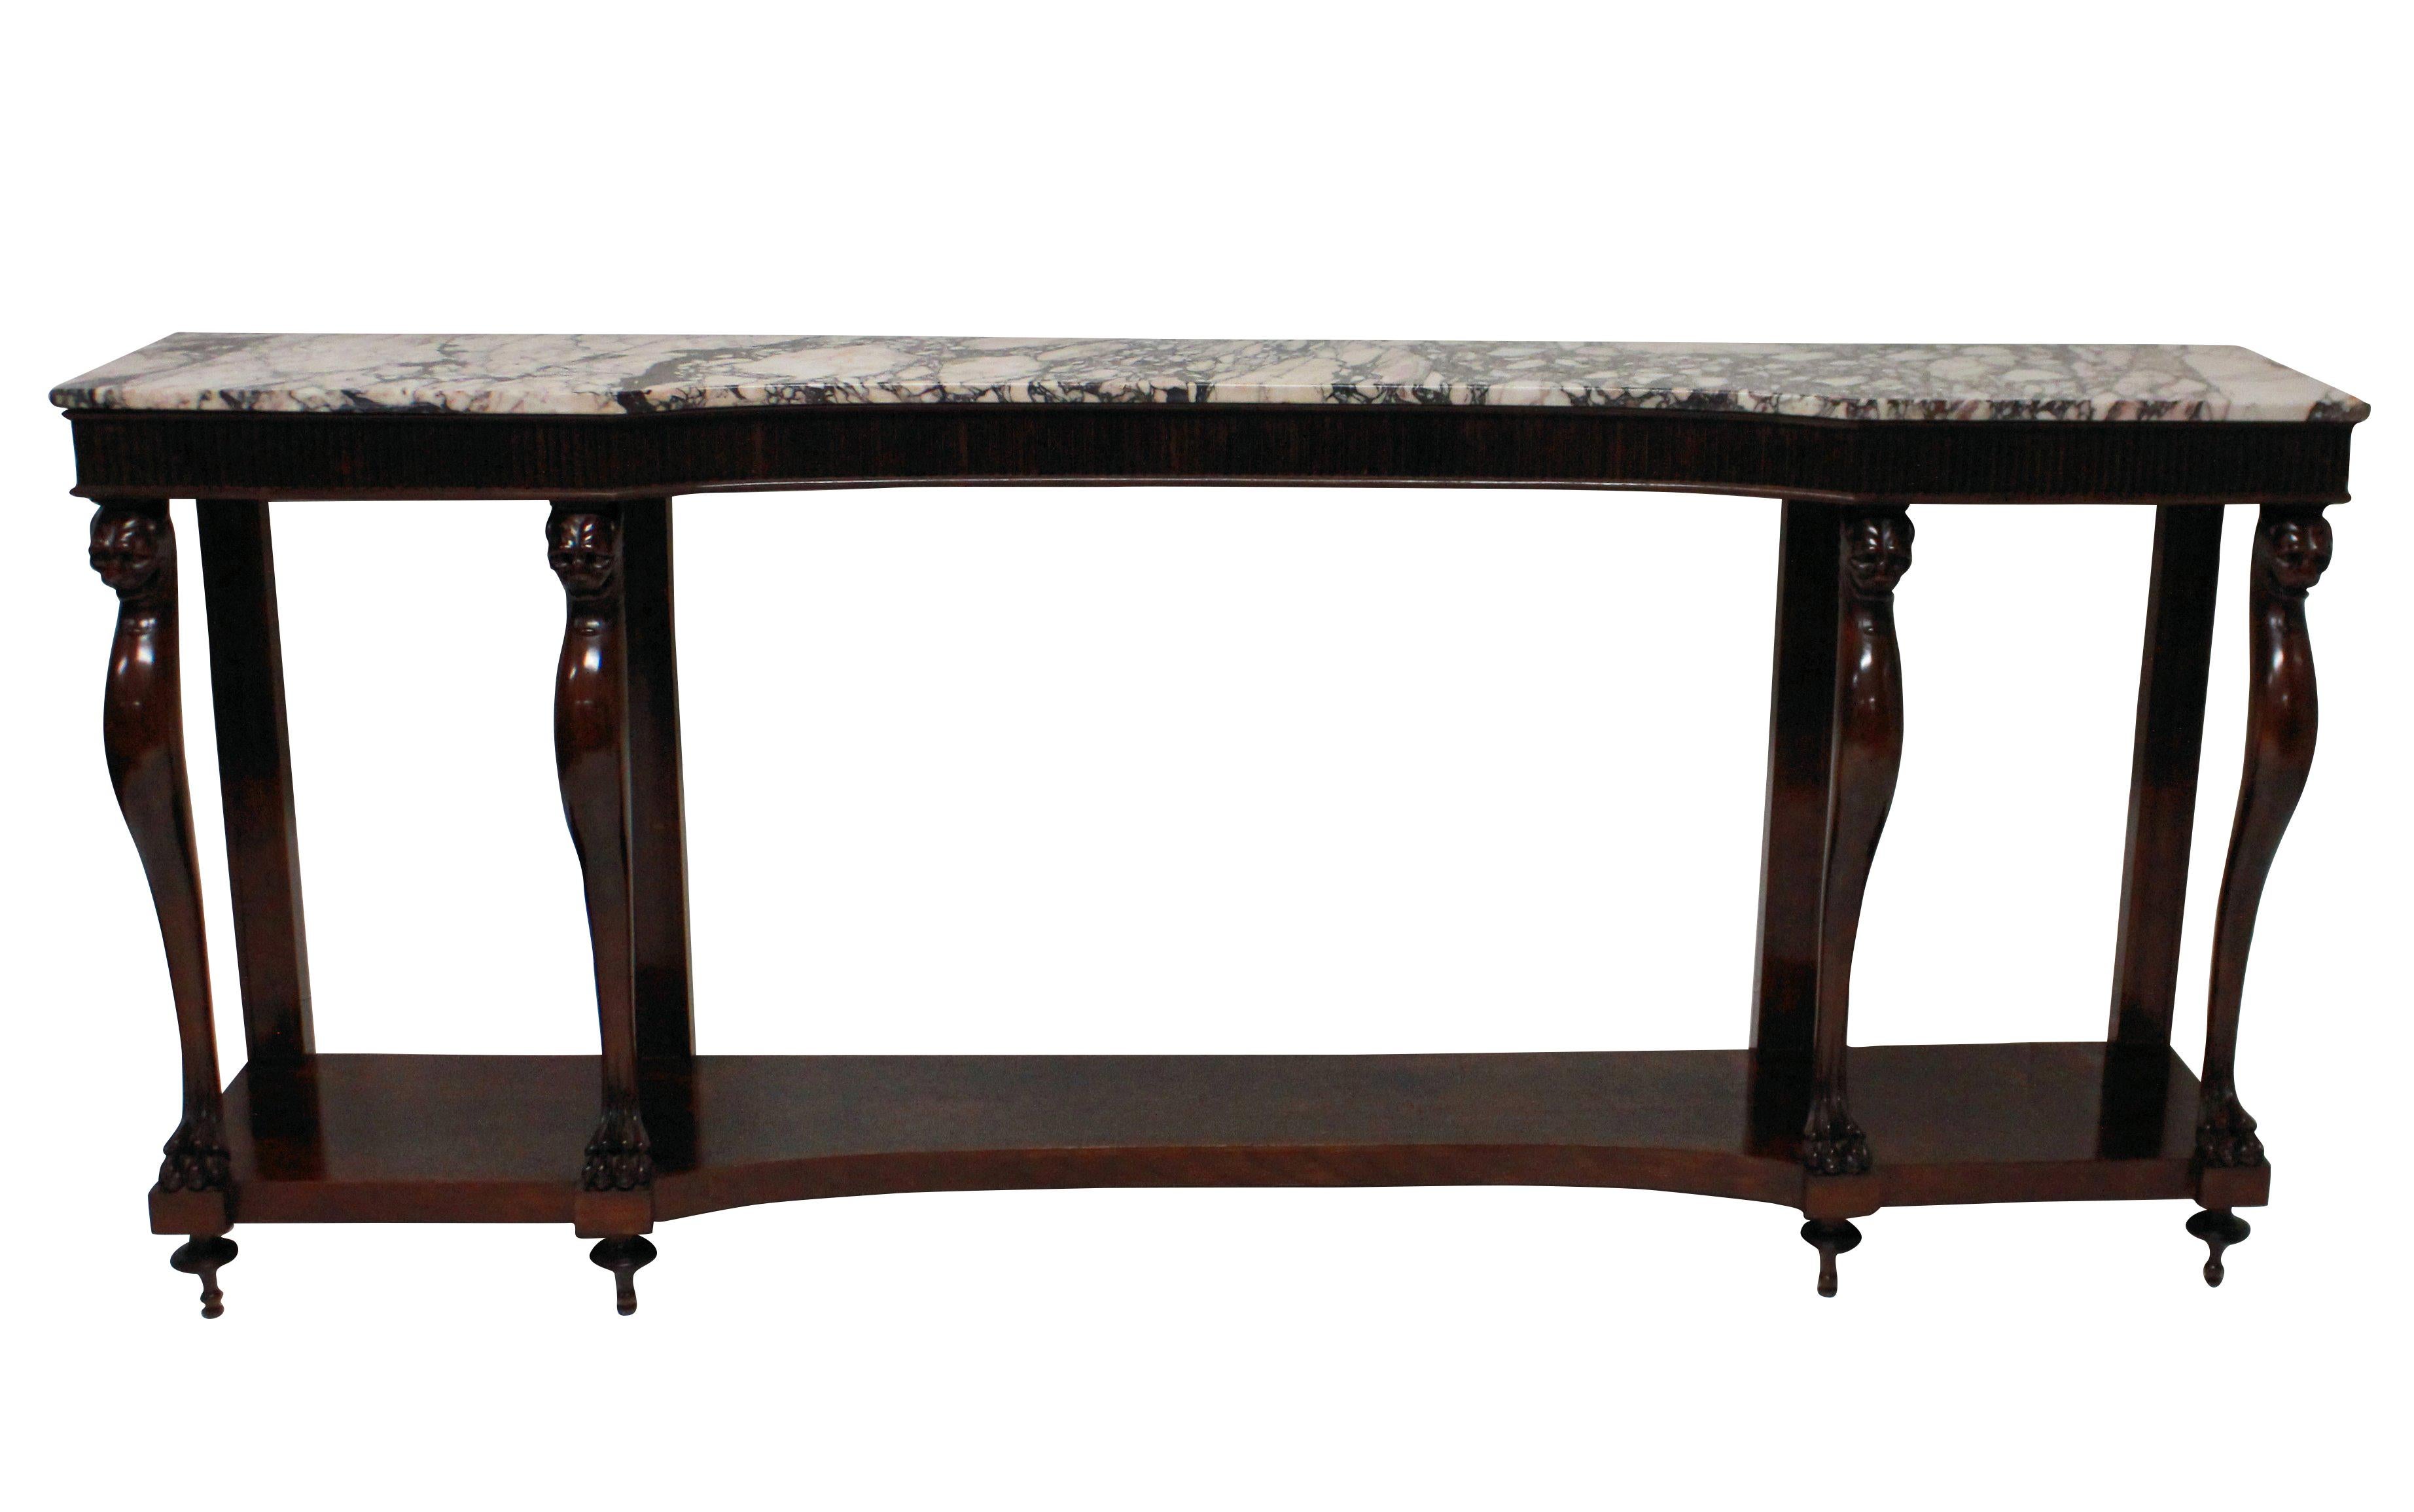 Mahogany Large Midcentury Italian Console Table with a Breche Violette Marble Top